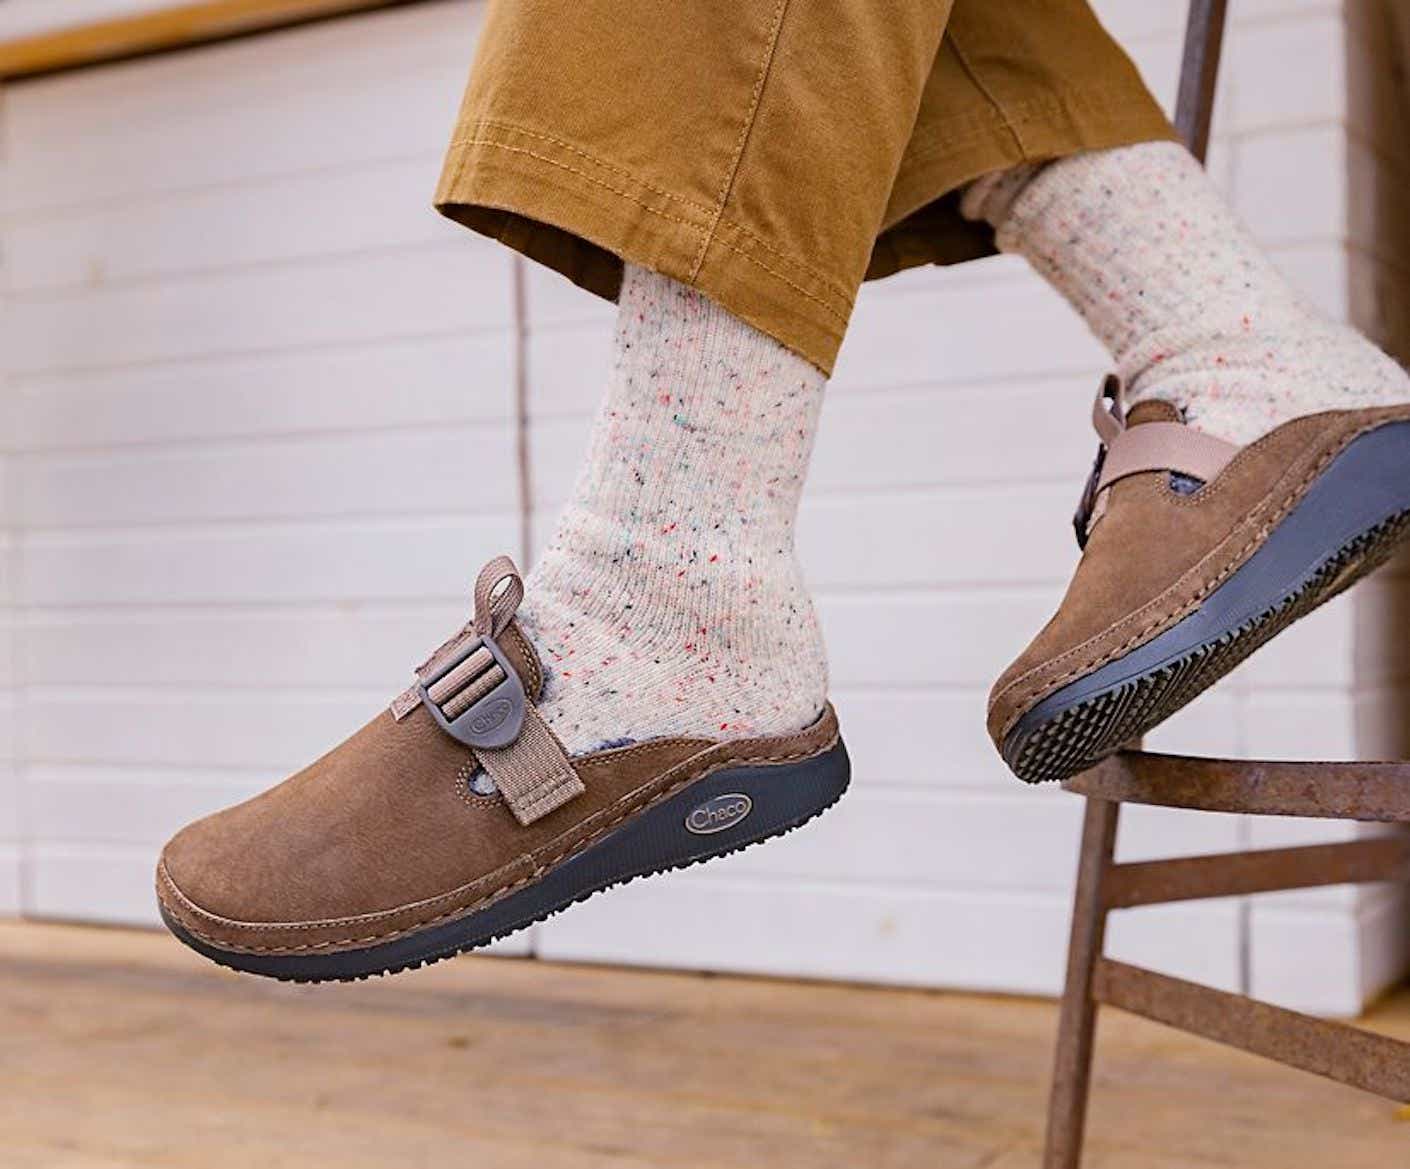 a personn wears a pair of clogs with oatmeal colored socks.